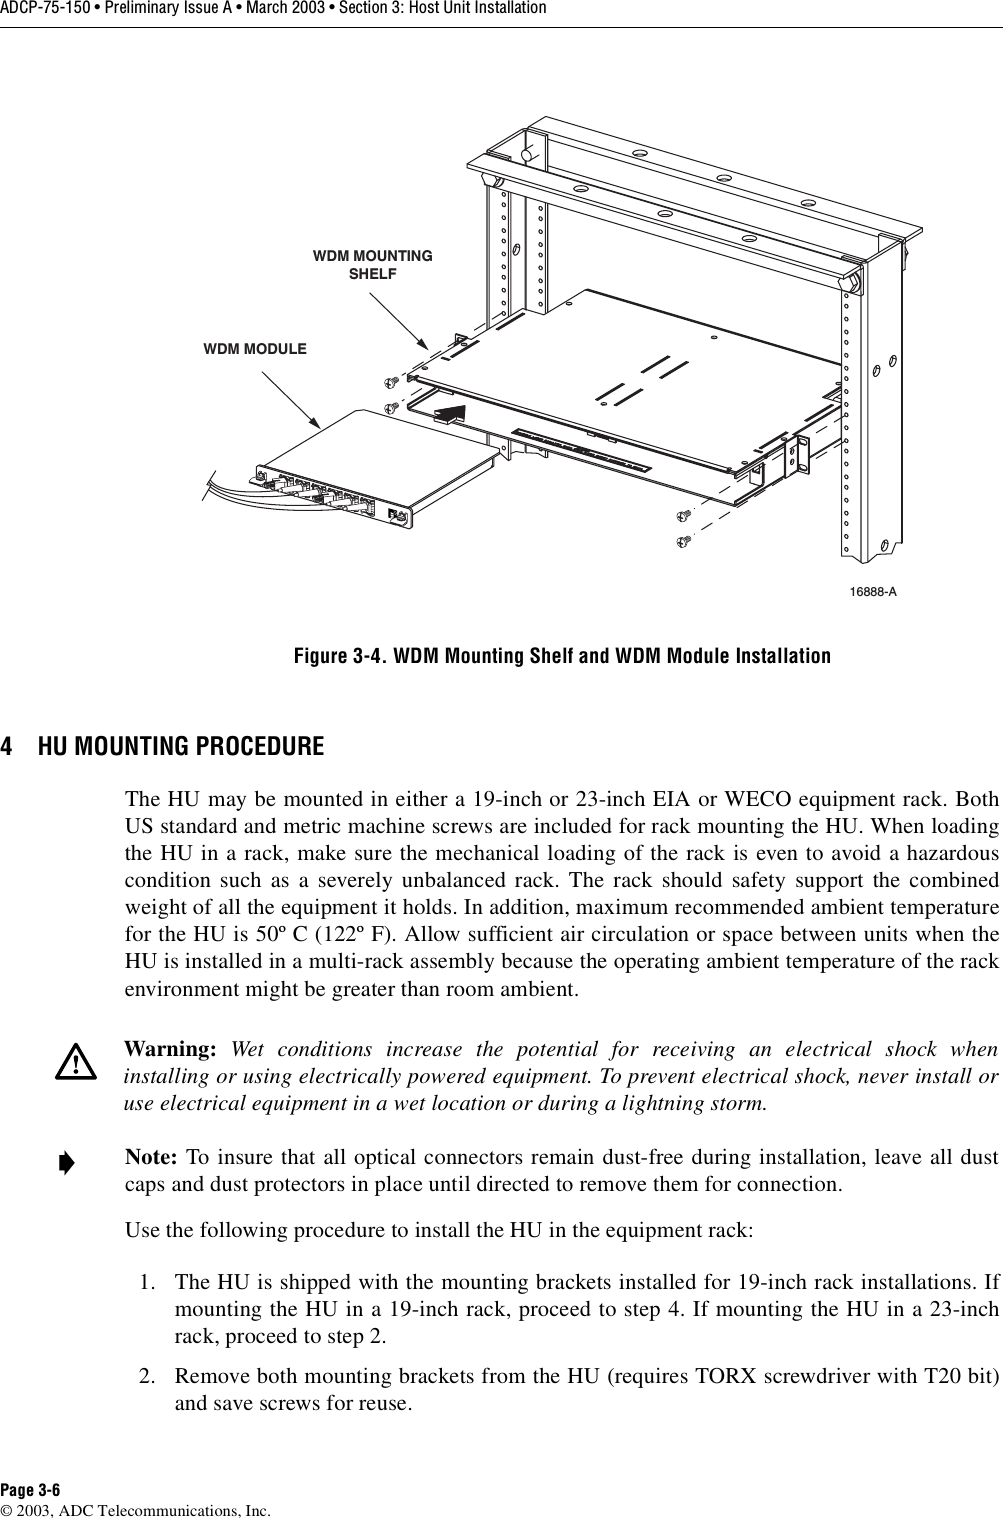 ADCP-75-150 • Preliminary Issue A • March 2003 • Section 3: Host Unit InstallationPage 3-6©2003, ADC Telecommunications, Inc.Figure 3-4. WDM Mounting Shelf and WDM Module Installation4 HU MOUNTING PROCEDUREThe HU may be mounted in either a19-inch or 23-inch EIA or WECO equipment rack. BothUS standard and metric machine screws are included for rack mounting the HU. When loadingthe HU in arack, make sure the mechanical loading of the rack is even to avoid ahazardouscondition such as aseverely unbalanced rack. The rack should safety support the combinedweight of all the equipment it holds. In addition, maximum recommended ambient temperaturefor the HU is 50º C(122º F). Allow sufficient air circulation or space between units when theHU is installed in amulti-rack assembly because the operating ambient temperature of the rackenvironment might be greater than room ambient.Use the following procedure to install the HU in the equipment rack:1. The HU is shipped with the mounting brackets installed for 19-inch rack installations. Ifmounting the HU in a19-inch rack, proceed to step 4. If mounting the HU in a23-inchrack, proceed to step 2.2. Remove both mounting brackets from the HU (requires TORX screwdriver with T20 bit)and save screws for reuse.Warning: Wet conditions increase the potential for receiving an electrical shock wheninstalling or using electrically powered equipment. To prevent electrical shock, never install oruse electrical equipment in awet location or during alightning storm.Note: To insure that all optical connectors remain dust-free during installation, leave all dustcaps and dust protectors in place until directed to remove them for connection.16888-A WDM MODULEWDM MOUNTINGSHELF